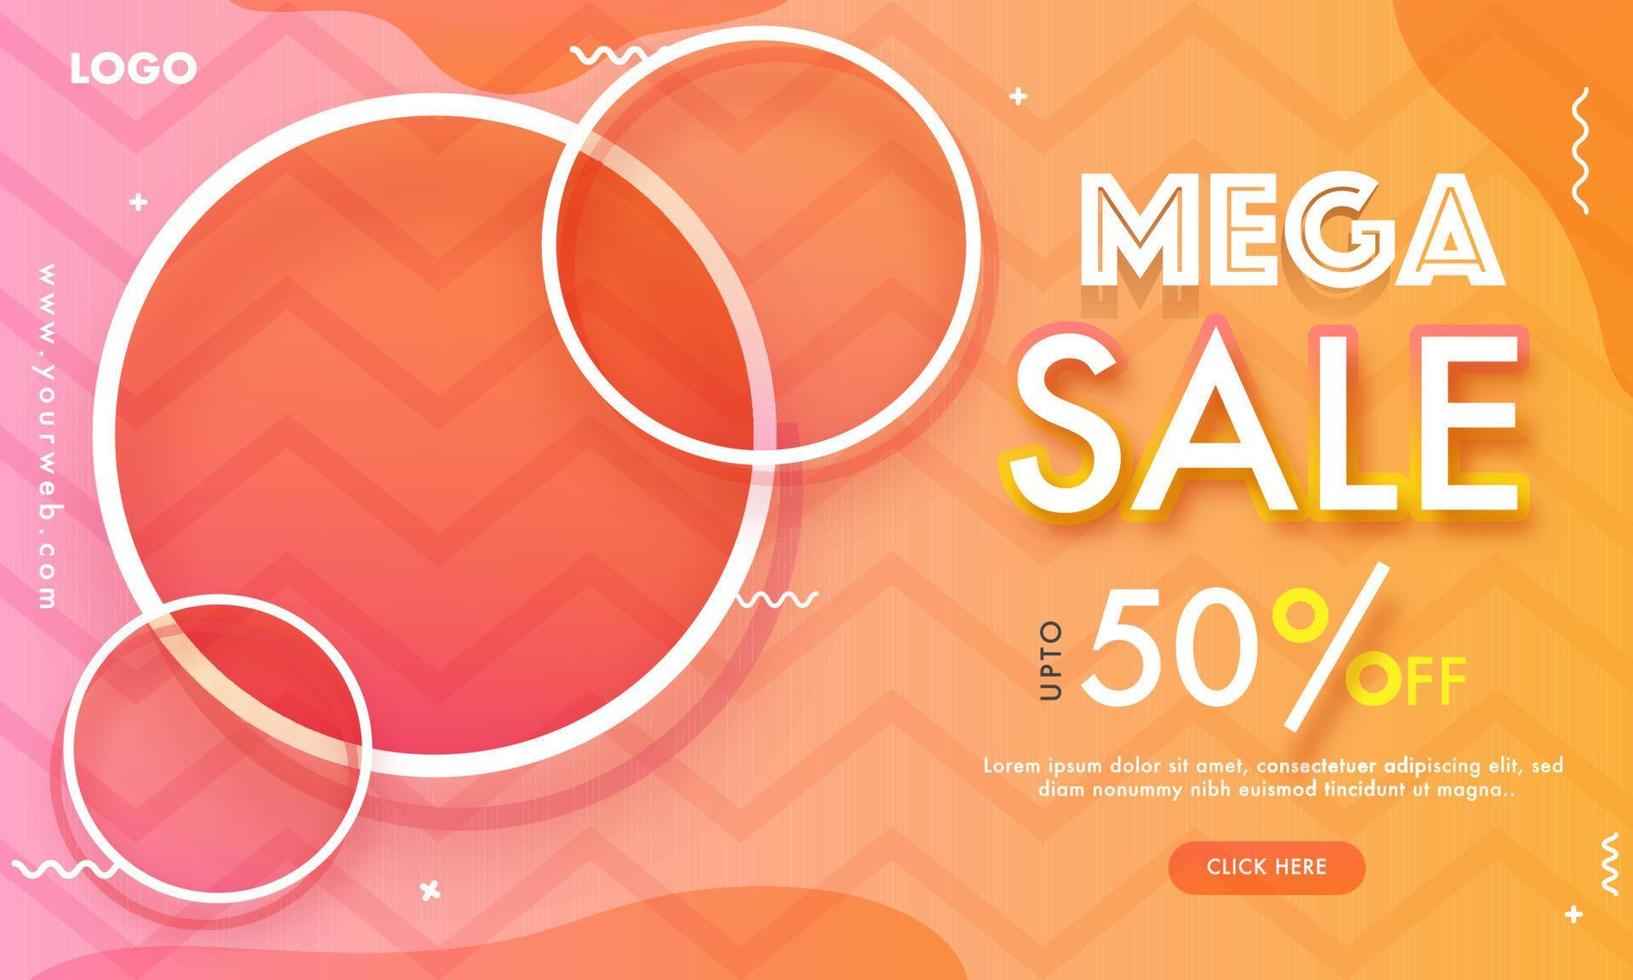 Mega Sale web banner design with discount offer and empty circular frame given for your product image on wavy striped pattern background. vector